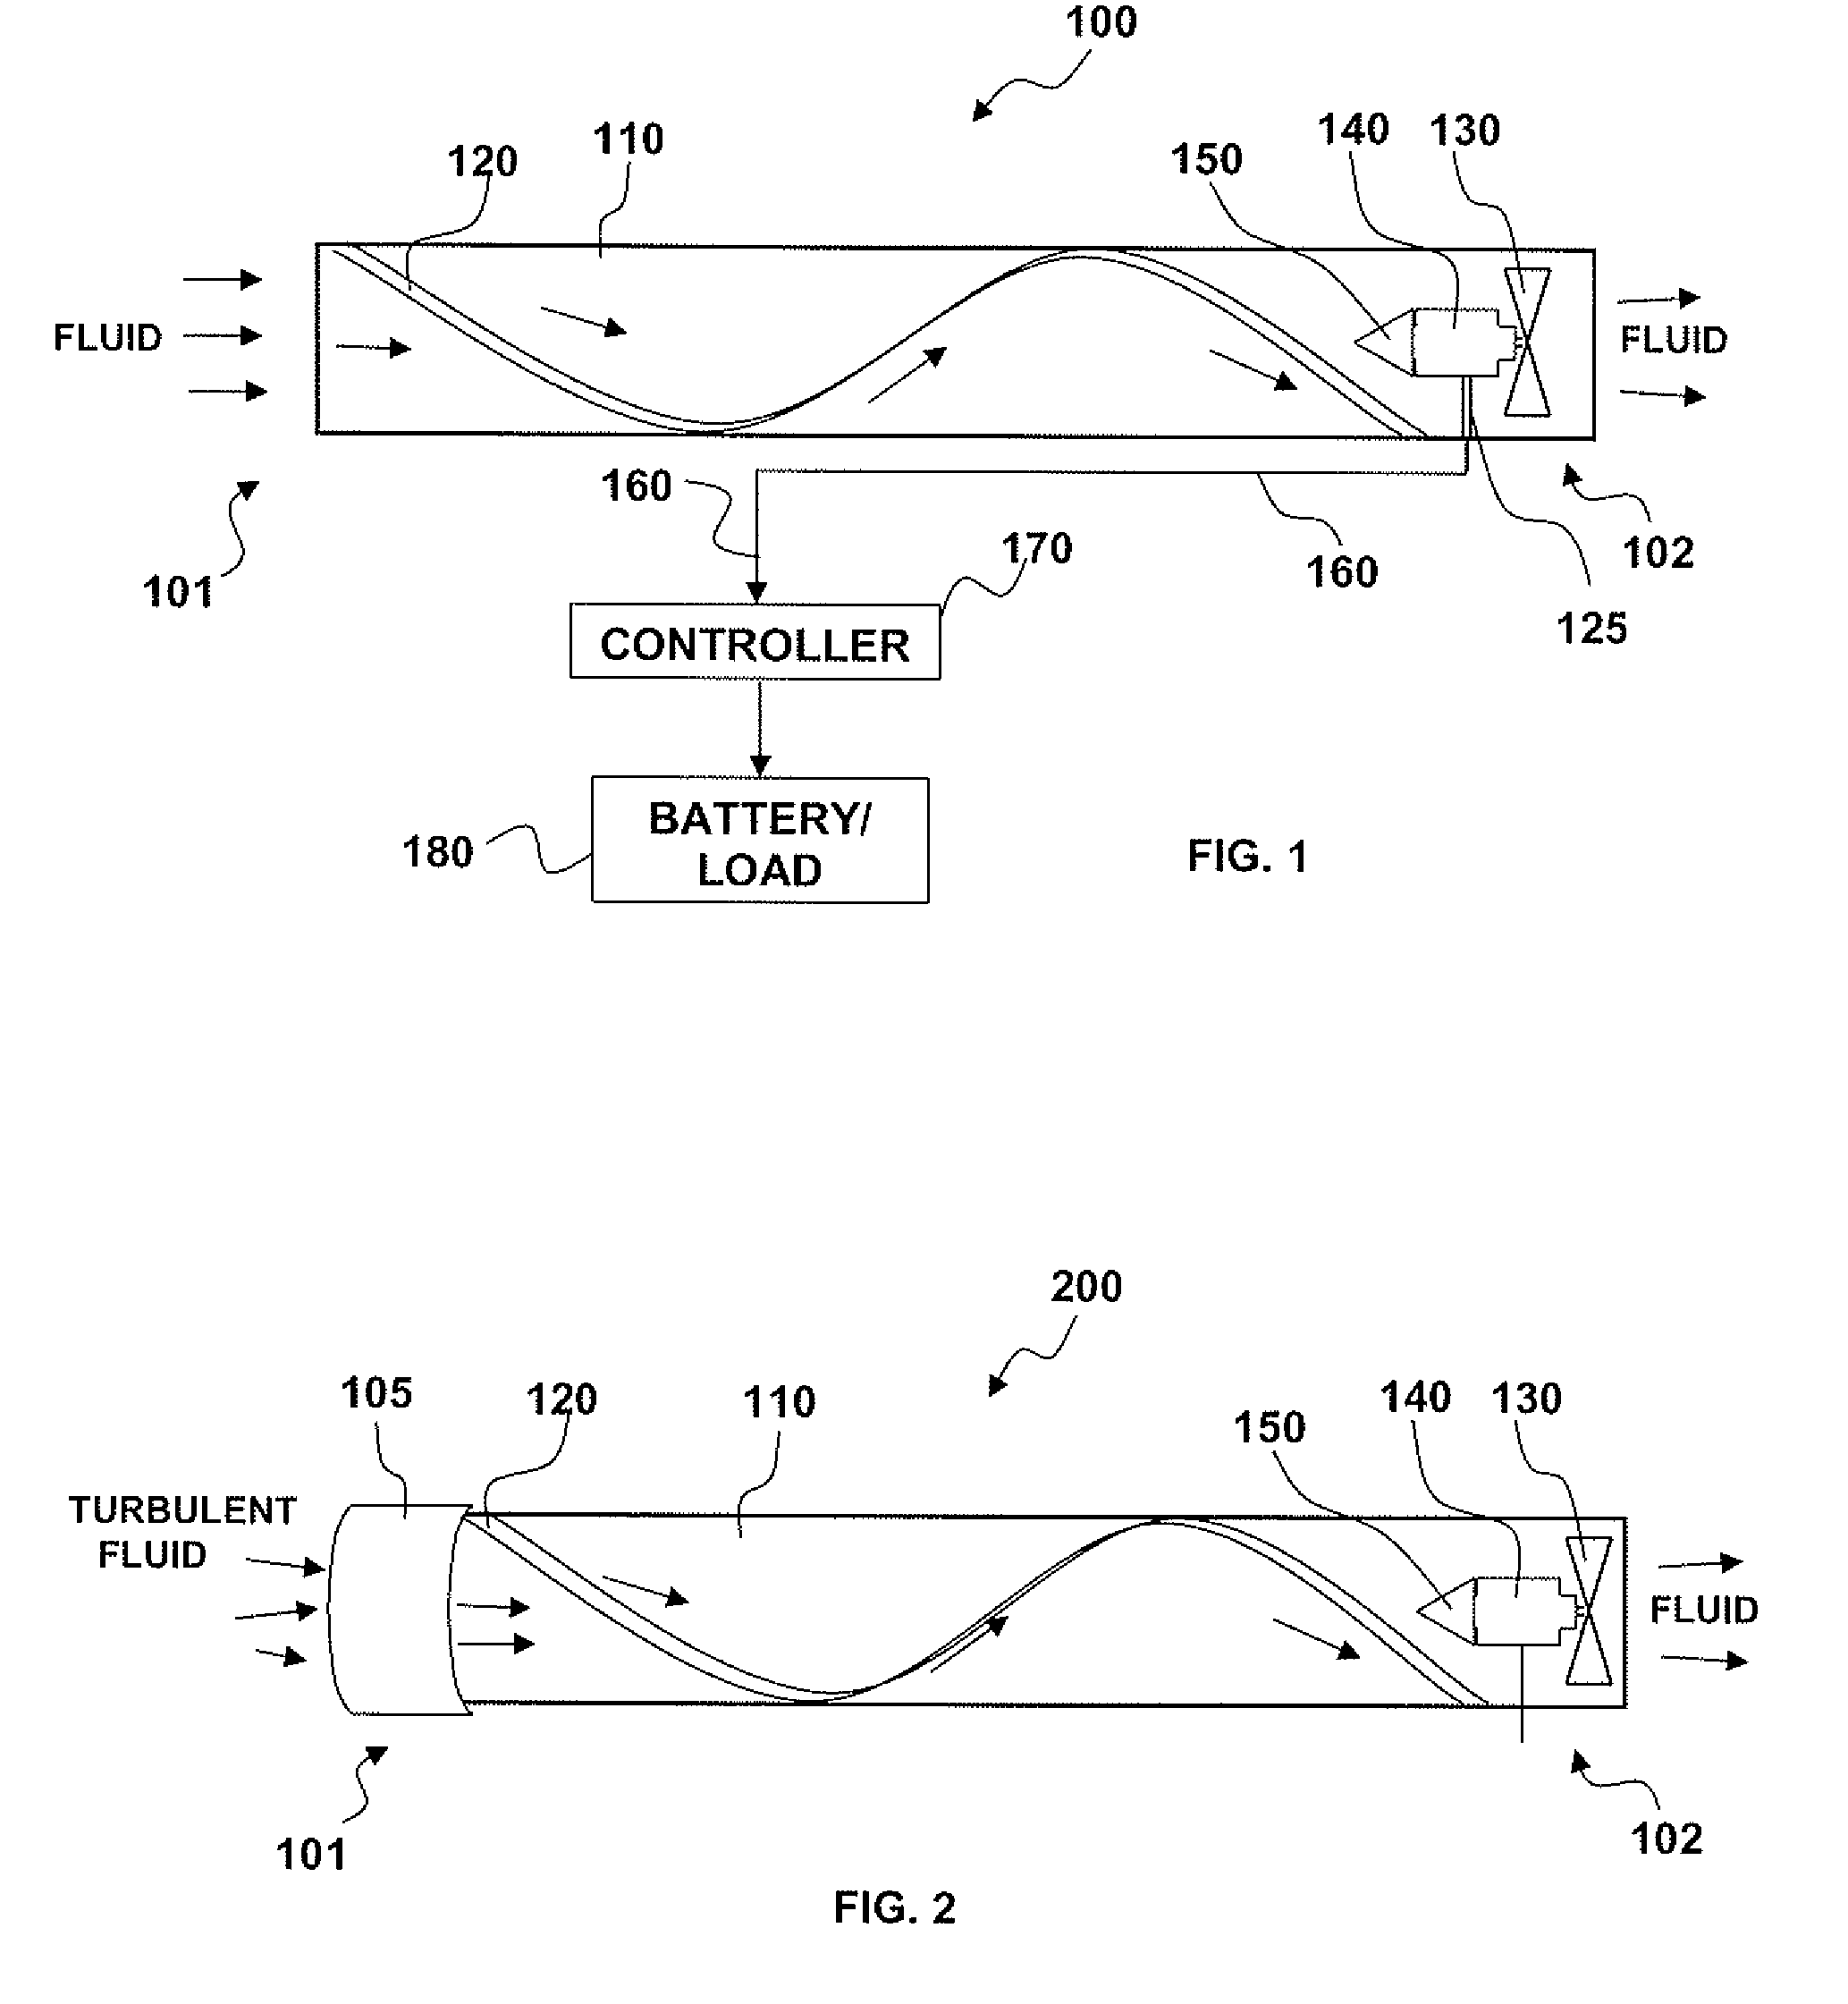 Fluid driven electric power generation system